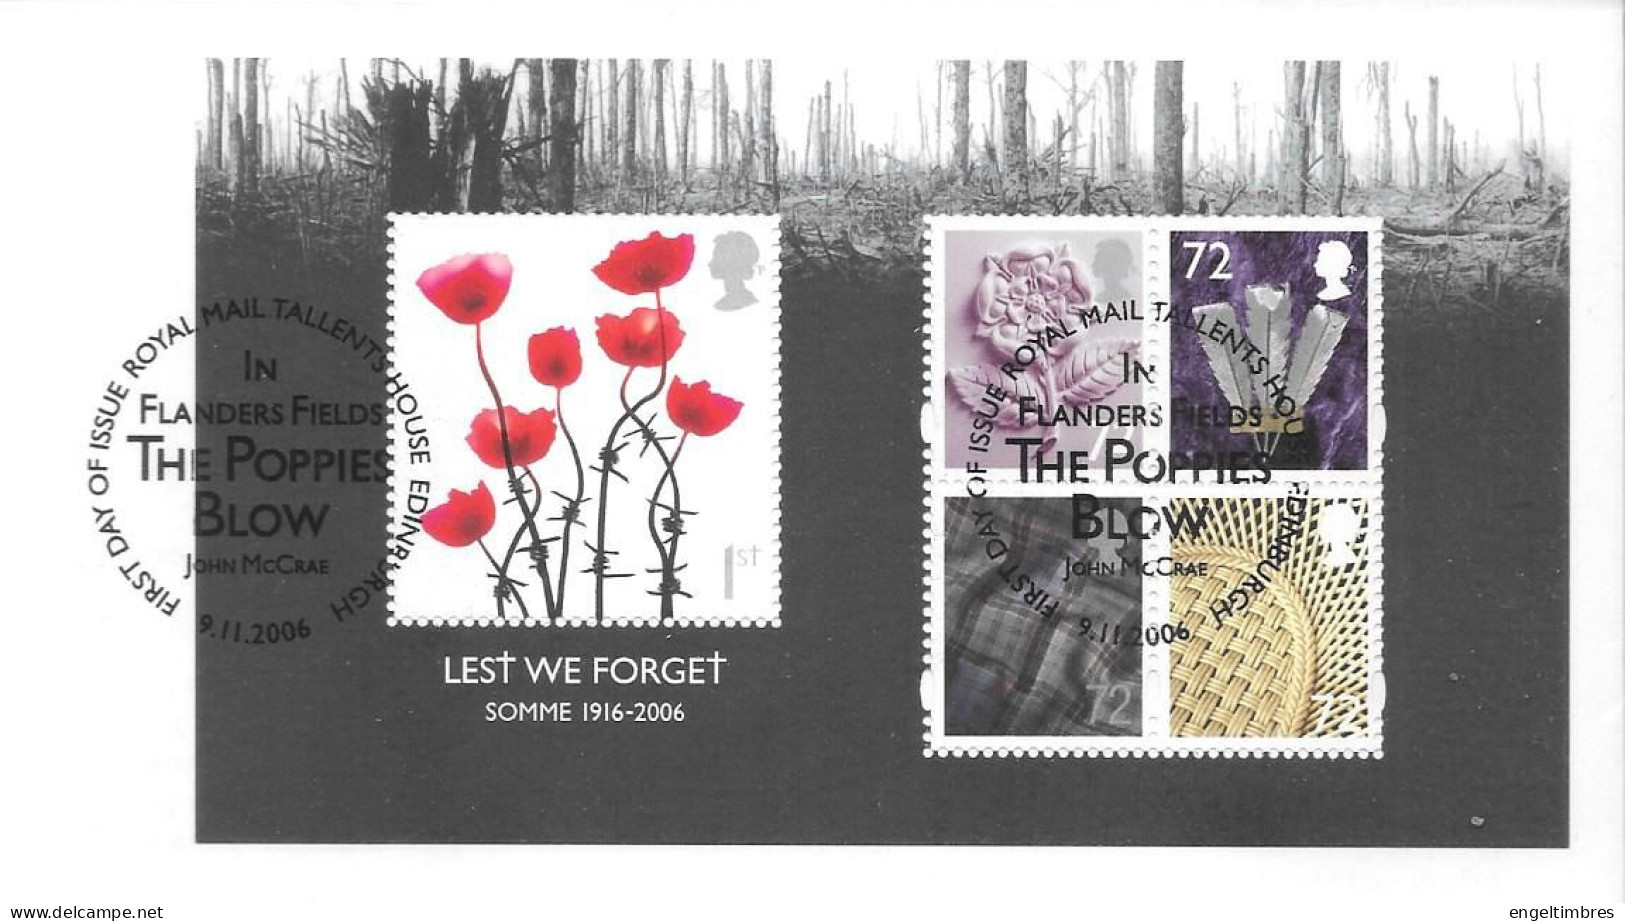 Gb   WW1 1916/2016   " Lest We Forget'  Minisheet   On FDC NOTES SEE NOTES - Briefe U. Dokumente